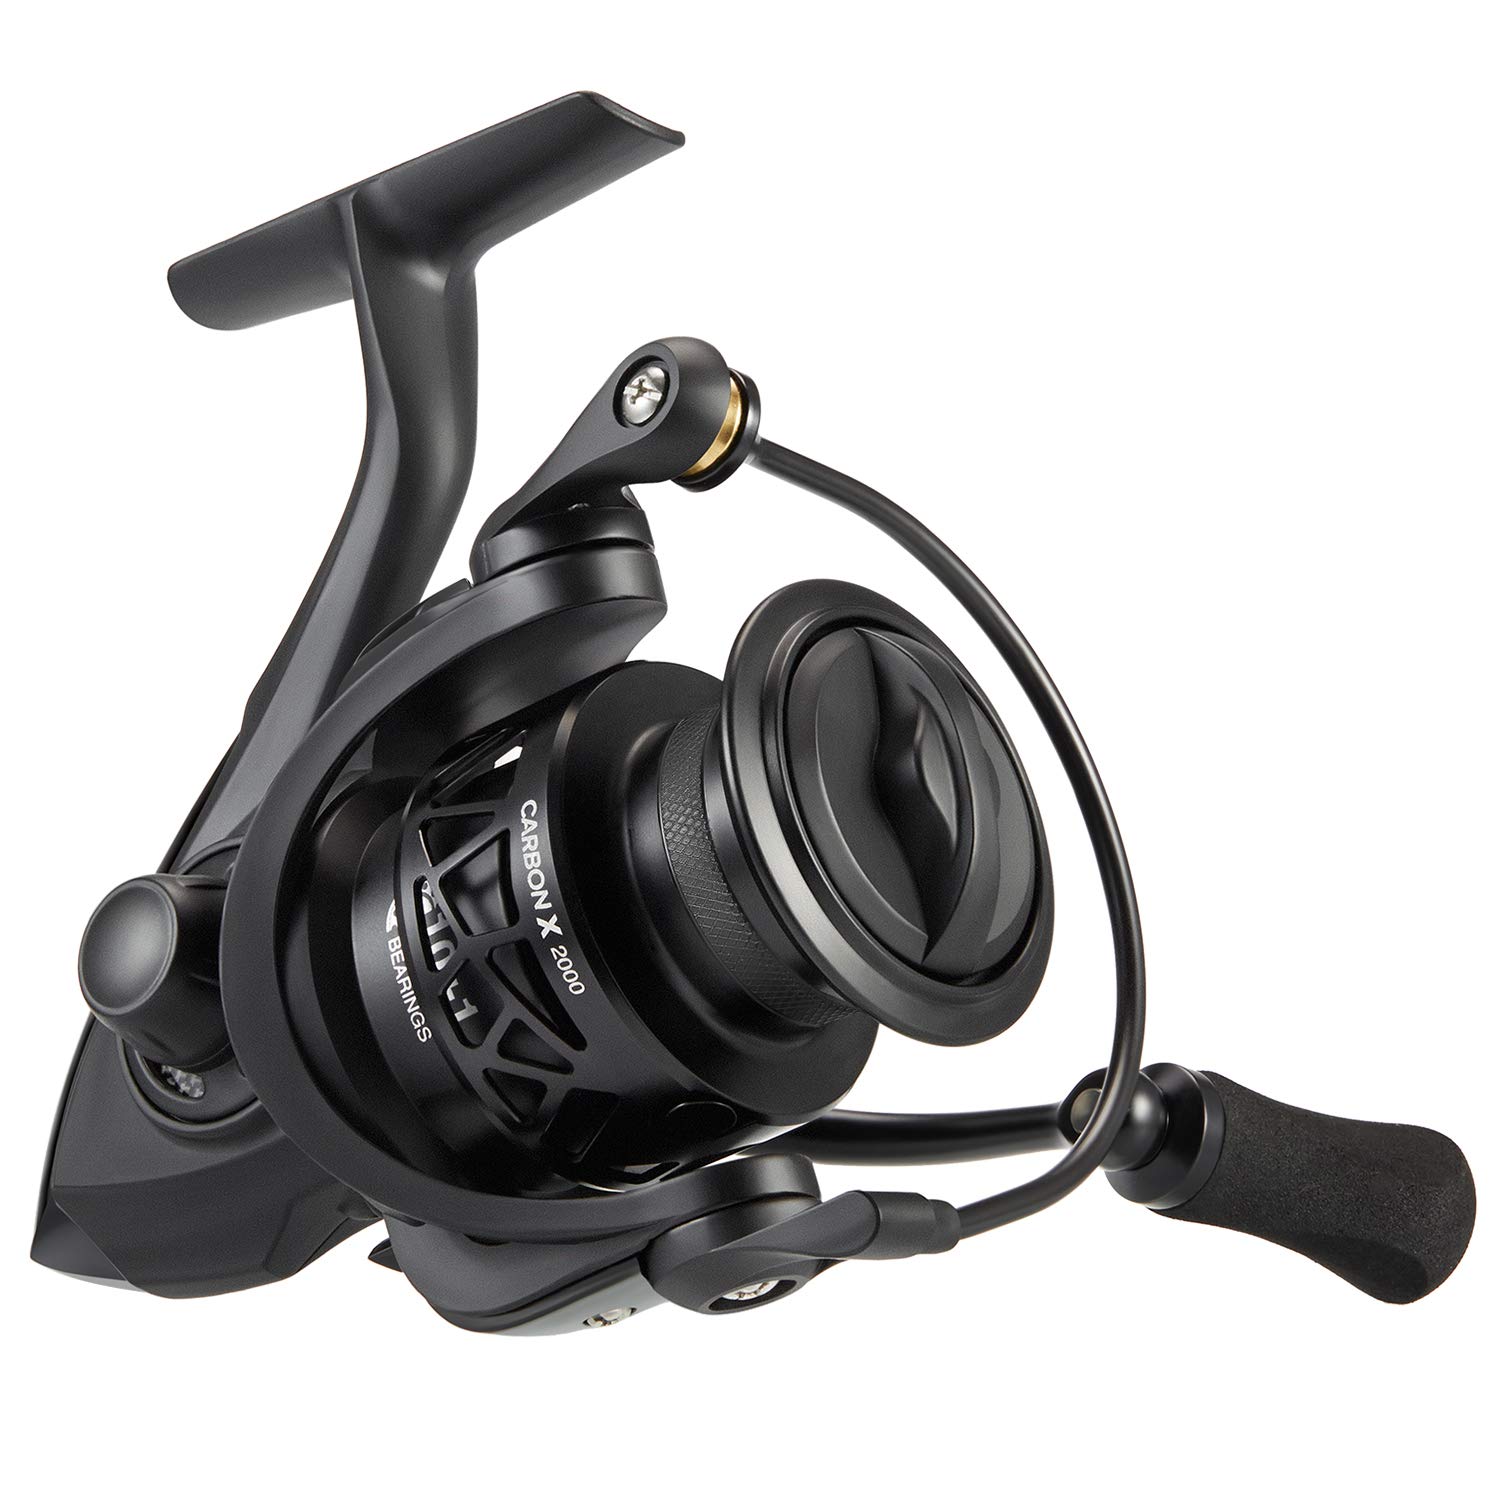 Piscifun Carbon X Spinning Reels - Light to 5.7oz, 5.2:1-6.2:1 High Speed  Gear Ratio, Carbon Frame and Rotor, 10+1 Shielded BB, Smooth Powerful  Freshwater and Saltwater Spinning Fishing Reel 2000